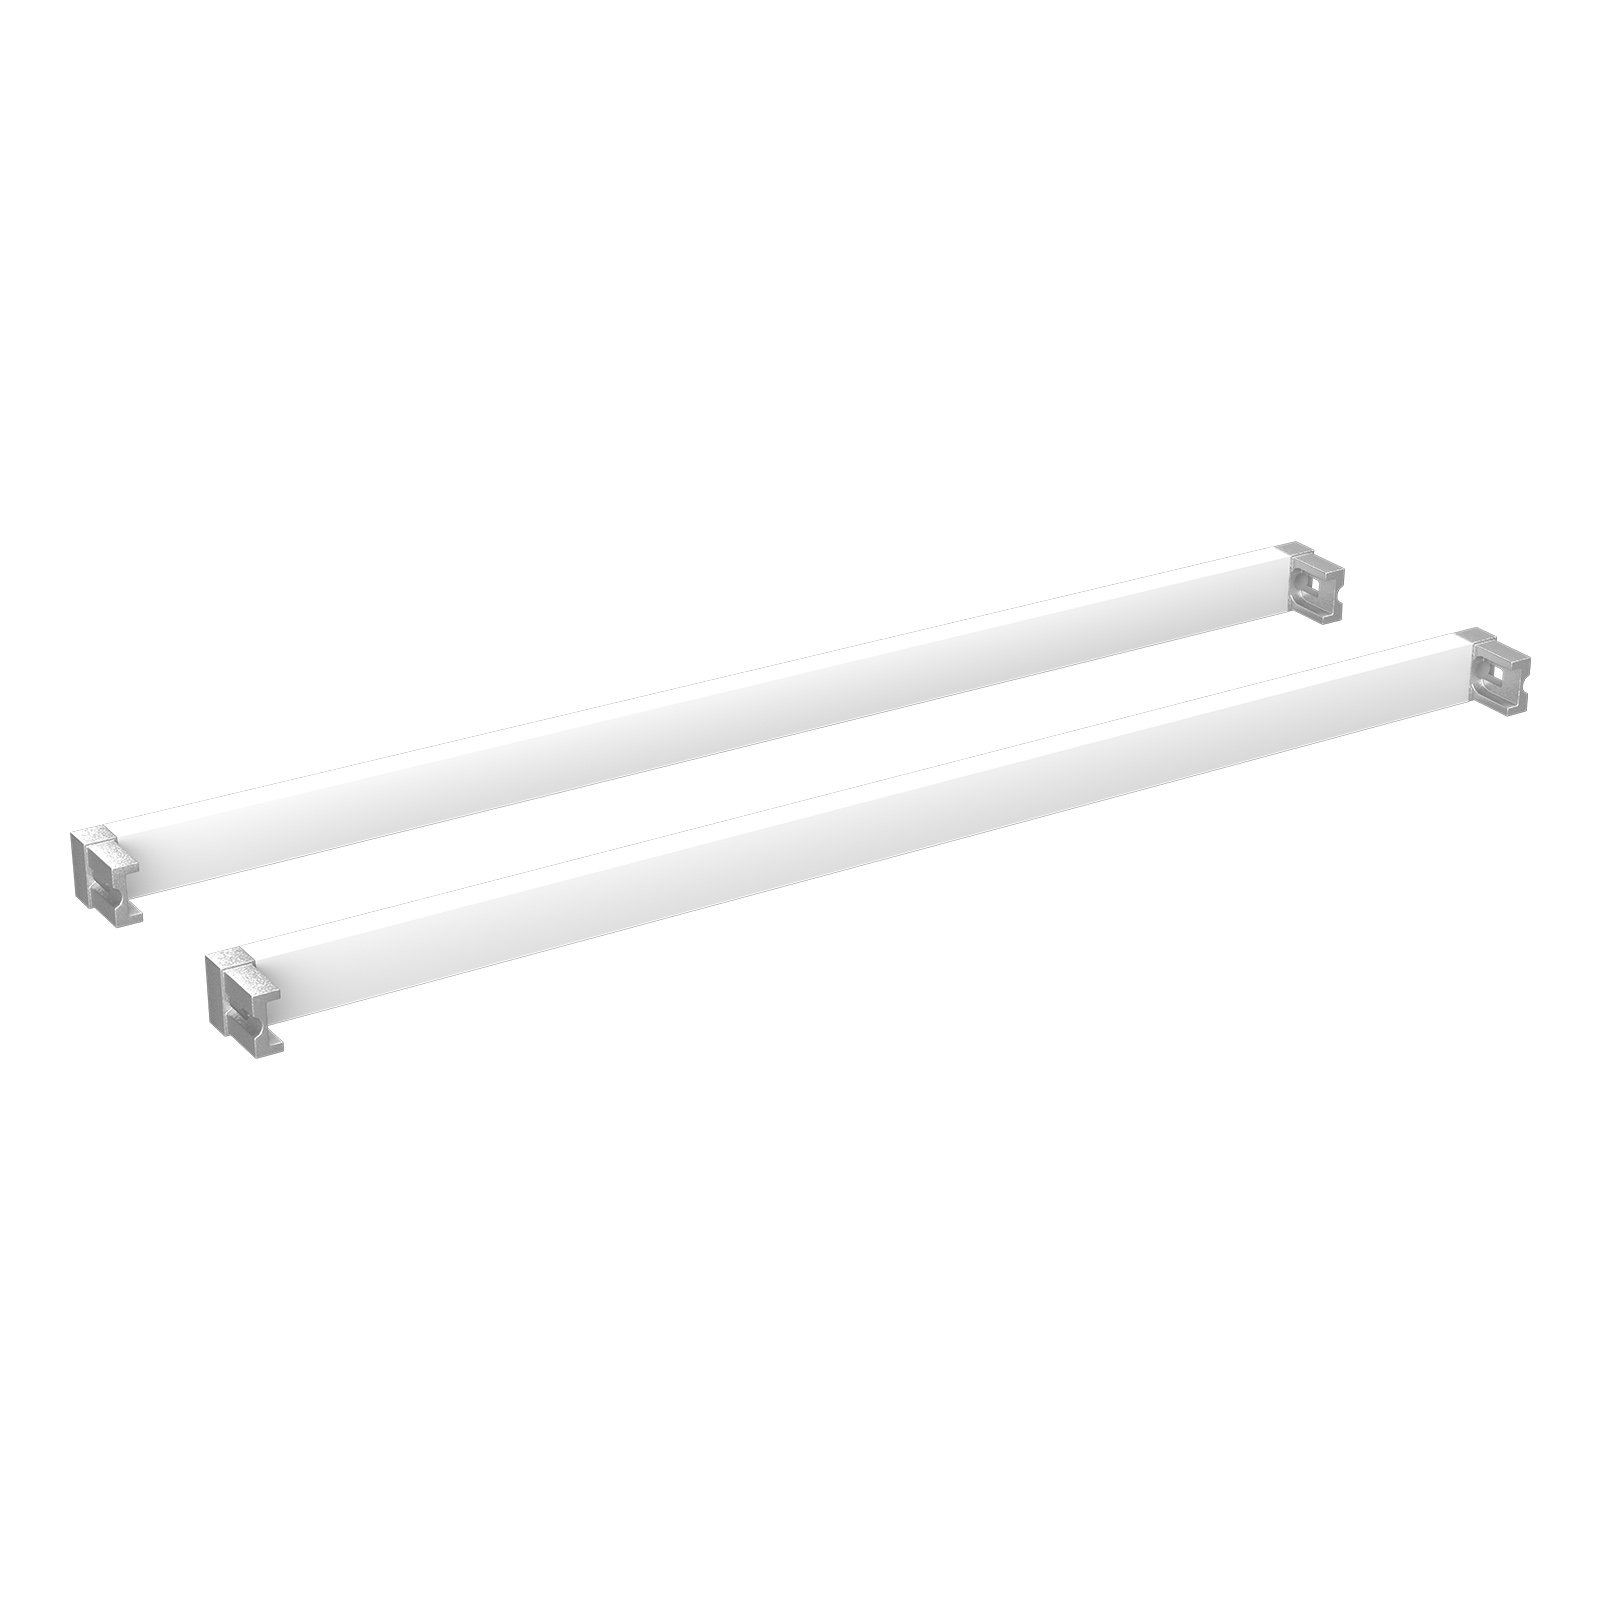 Home Solutions 435mm Cross Bars & L-Connector White